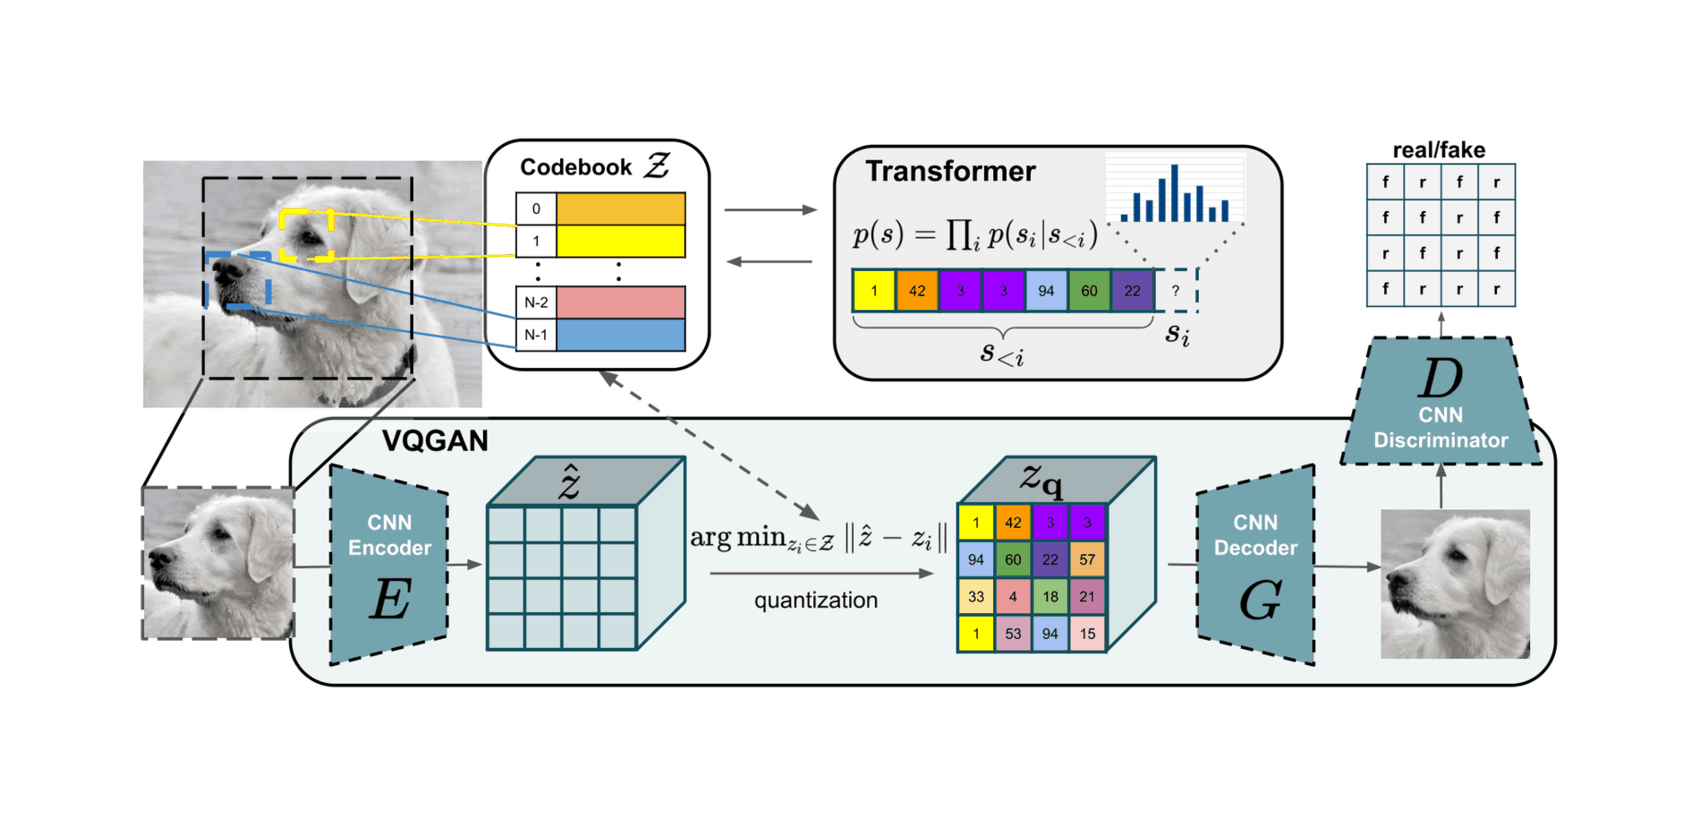 We combine the efficiency of convolutional approaches with the expressivity of transformers by introducing a convolutional VQGAN, which learns a codebook of context-rich visual parts, whose composition is modeled with an autoregressive transformer.